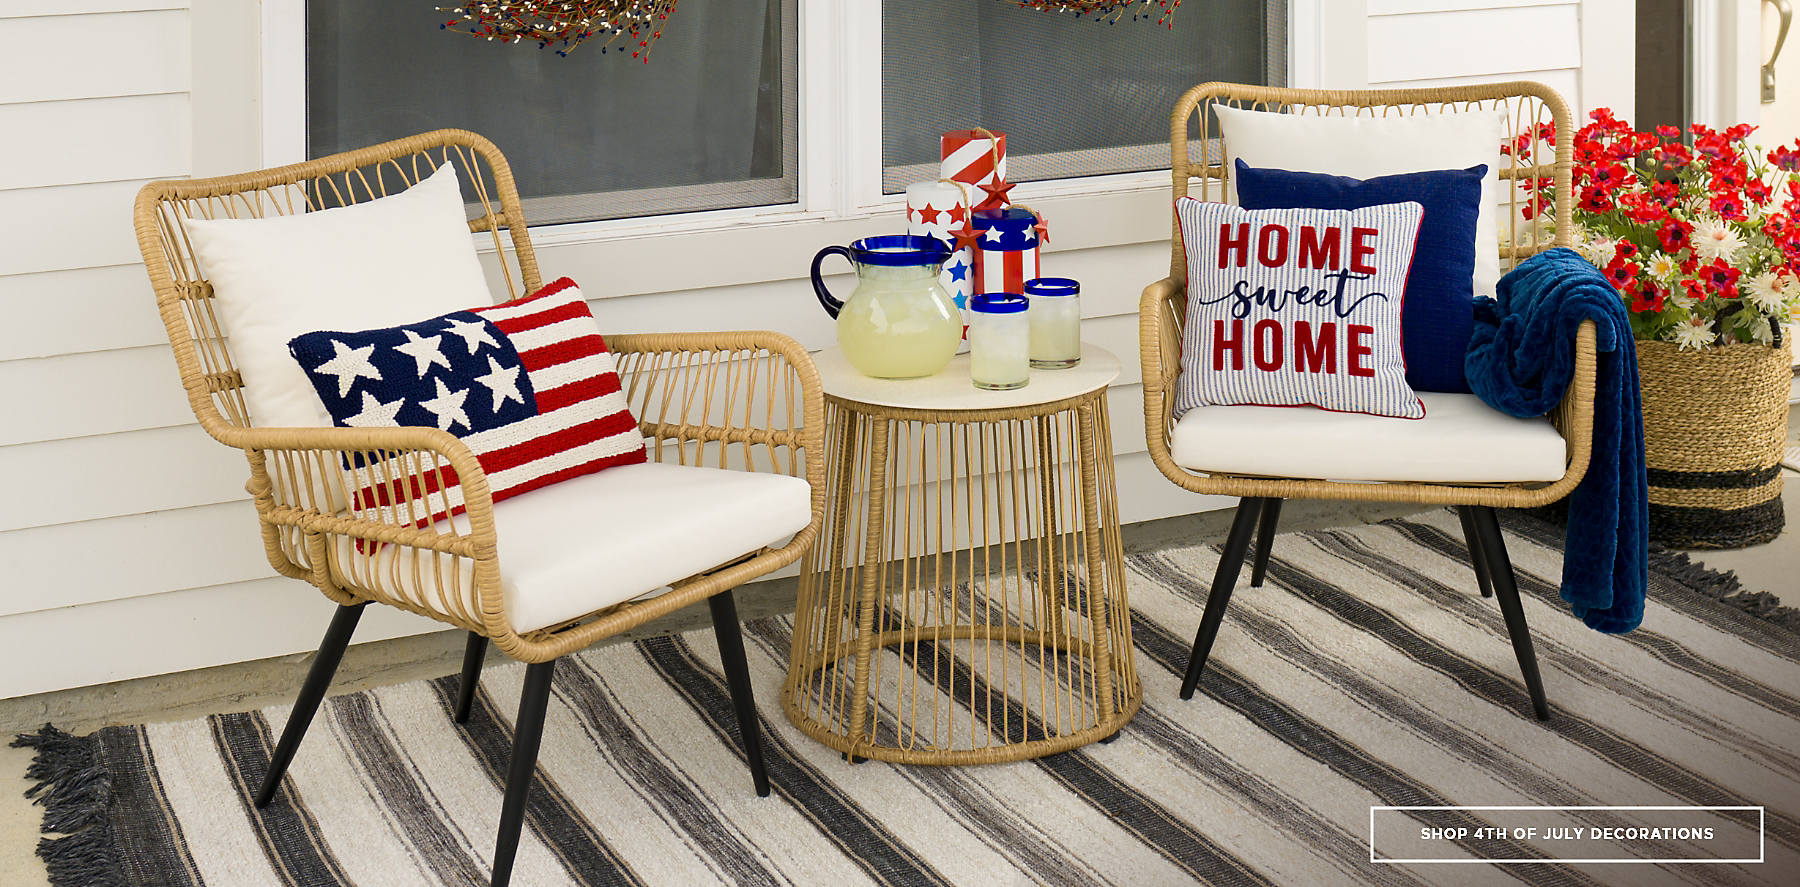 Shop 4th of July Decorations